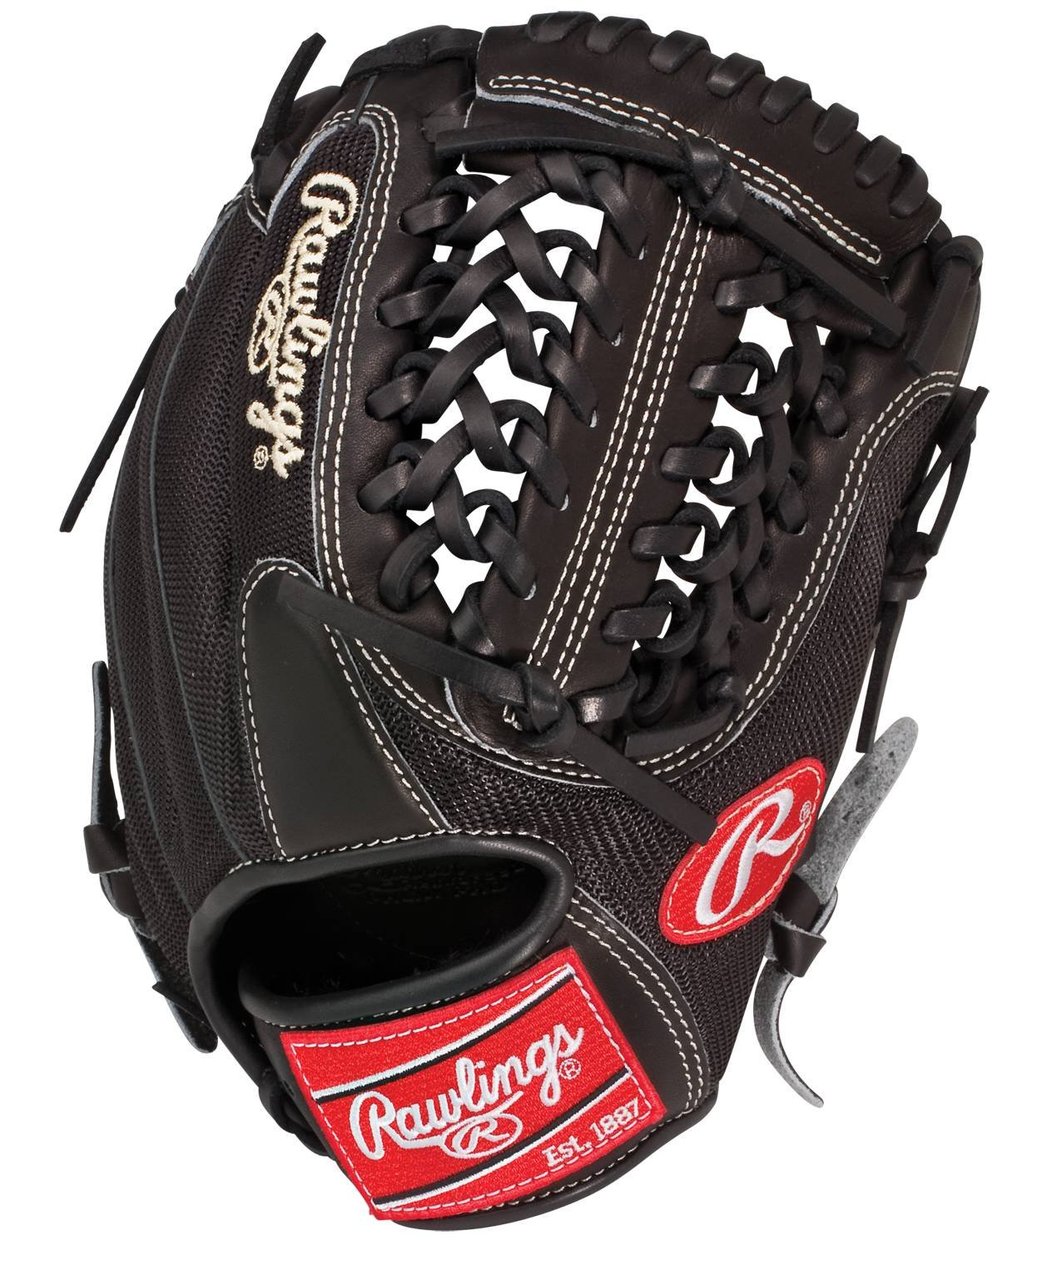 Rawlings PRO204DM Heart of the Hide Pro Mesh 11.5 inch Baseball Glove (Right Handed Throw) : This Heart of the Hide Pro Mesh 11 12 baseball glove from features a conventional back and the Modified Trap-Eze Web pattern